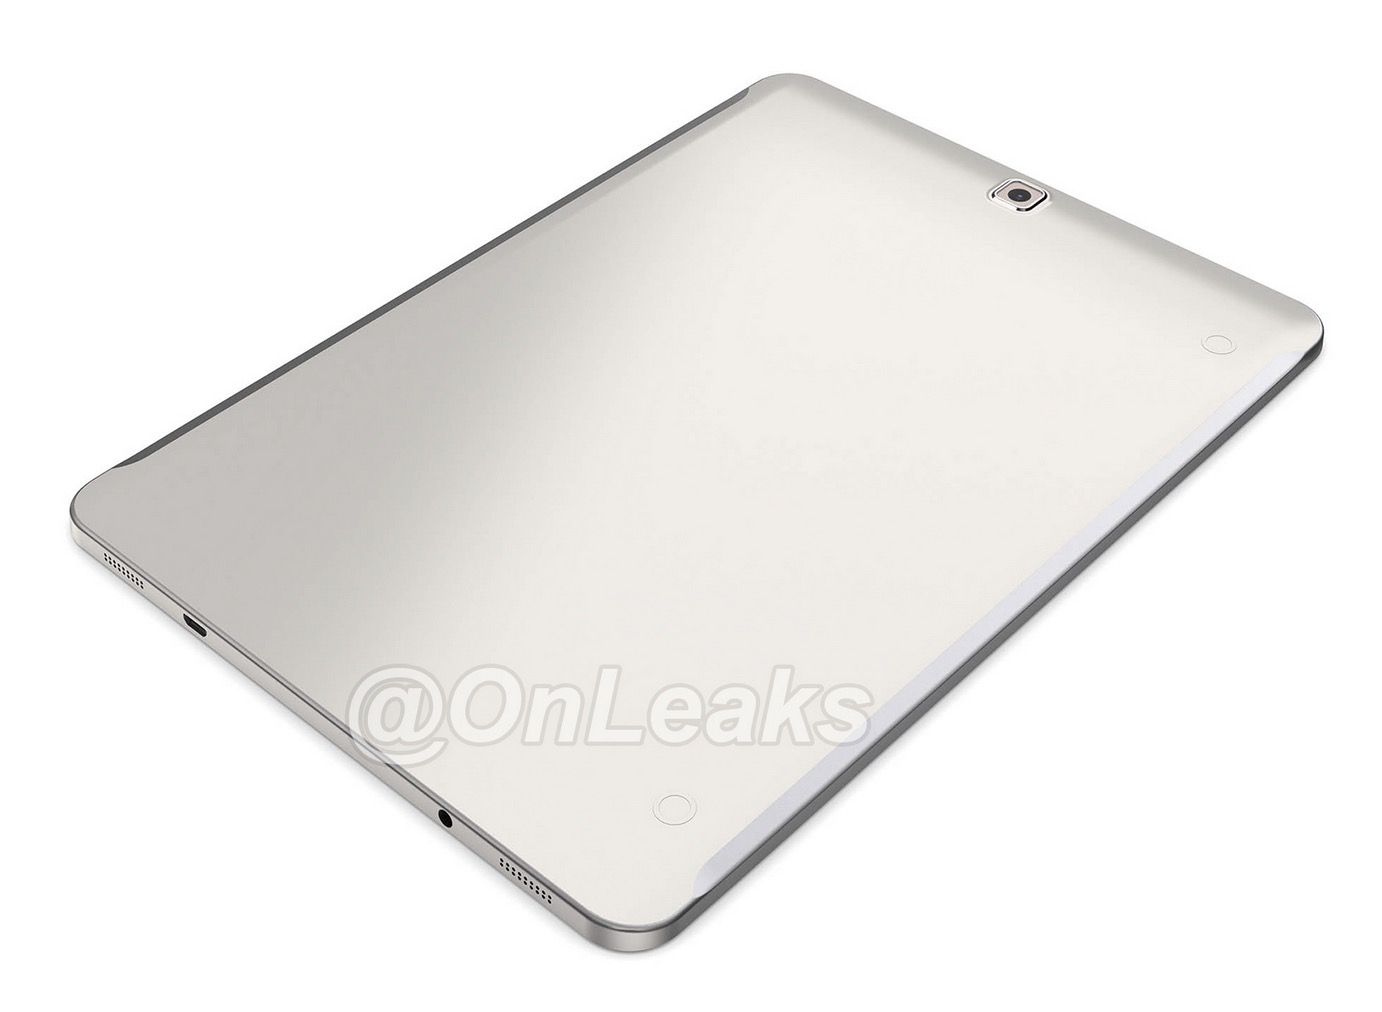 samsung galaxy tab s2 picture leak shows the metal frame of the sgs6 image 1